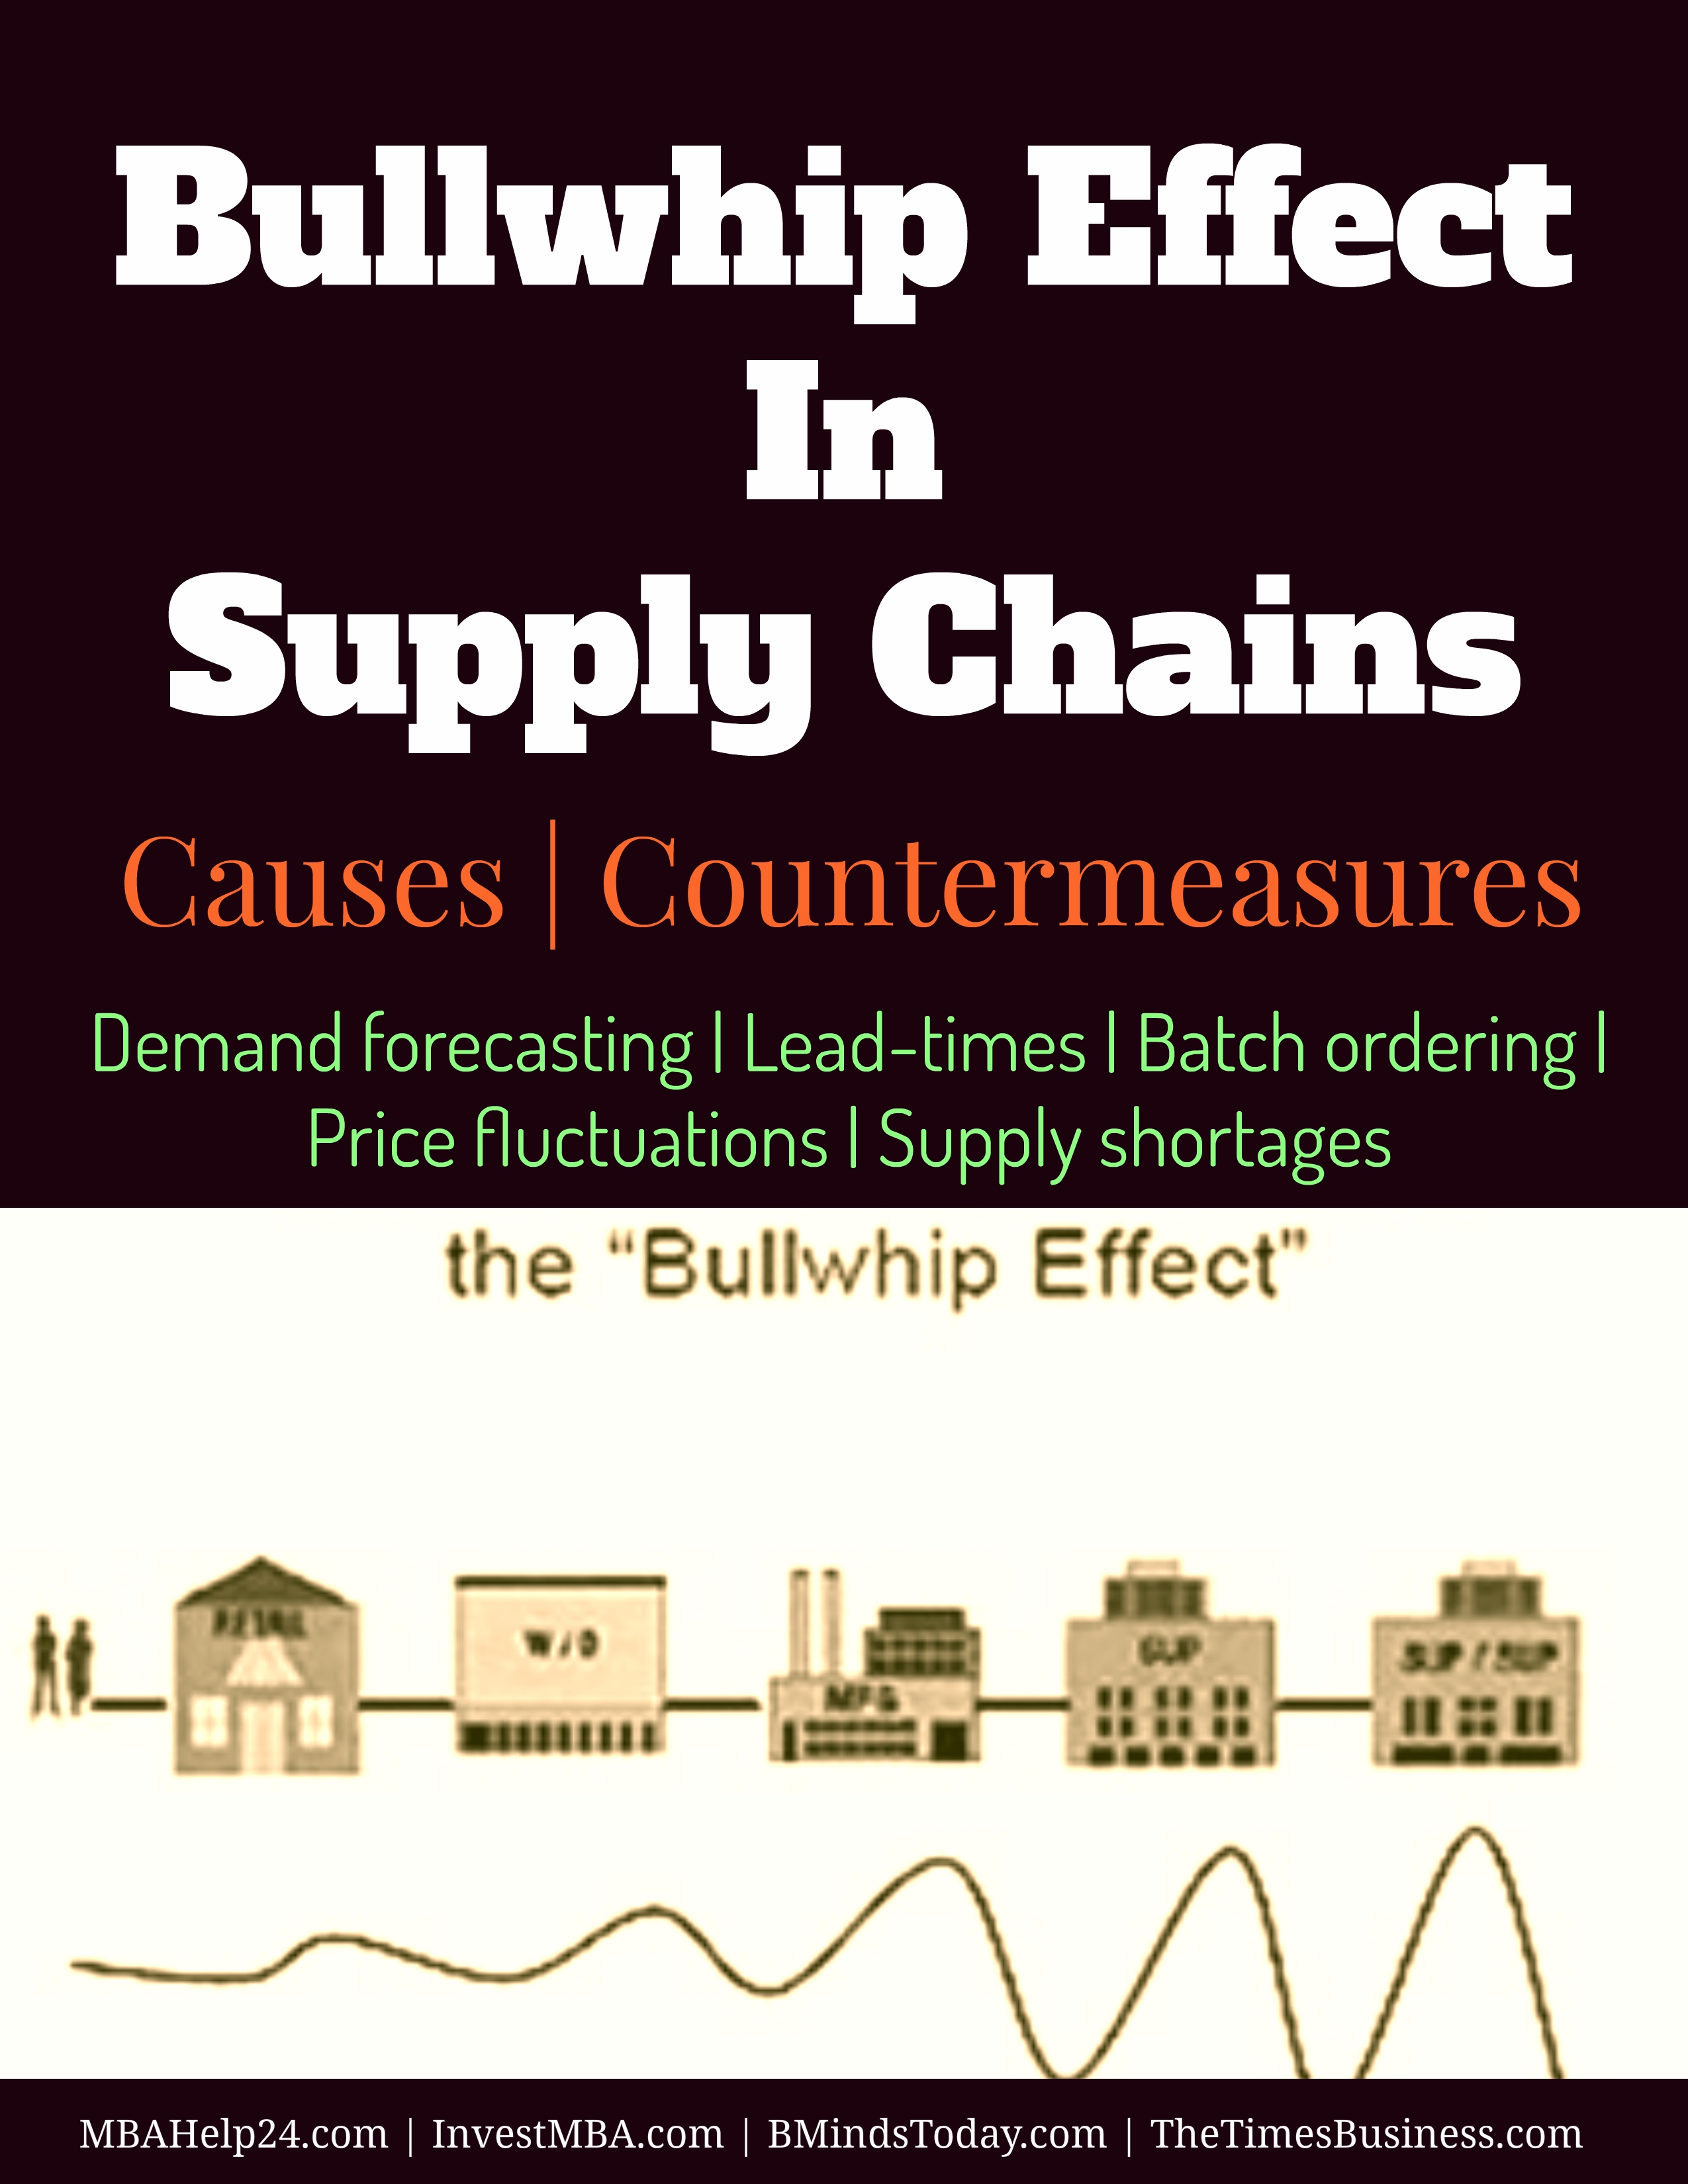 The Bullwhip Effect In Supply Chains | Causes | Countermeasures | Demand forecasting | Lead-times | Batch ordering | Price fluctuations | Supply shortages  Bullwhip Effect The Bullwhip Effect In Supply Chains | Causes | Countermeasures Bullwhip Effect In Supply Chains Causes Countermeasures bullwhip effect in supply chains | causes Bullwhip Effect In Supply Chains | Causes Bullwhip Effect In Supply Chains Causes Countermeasures